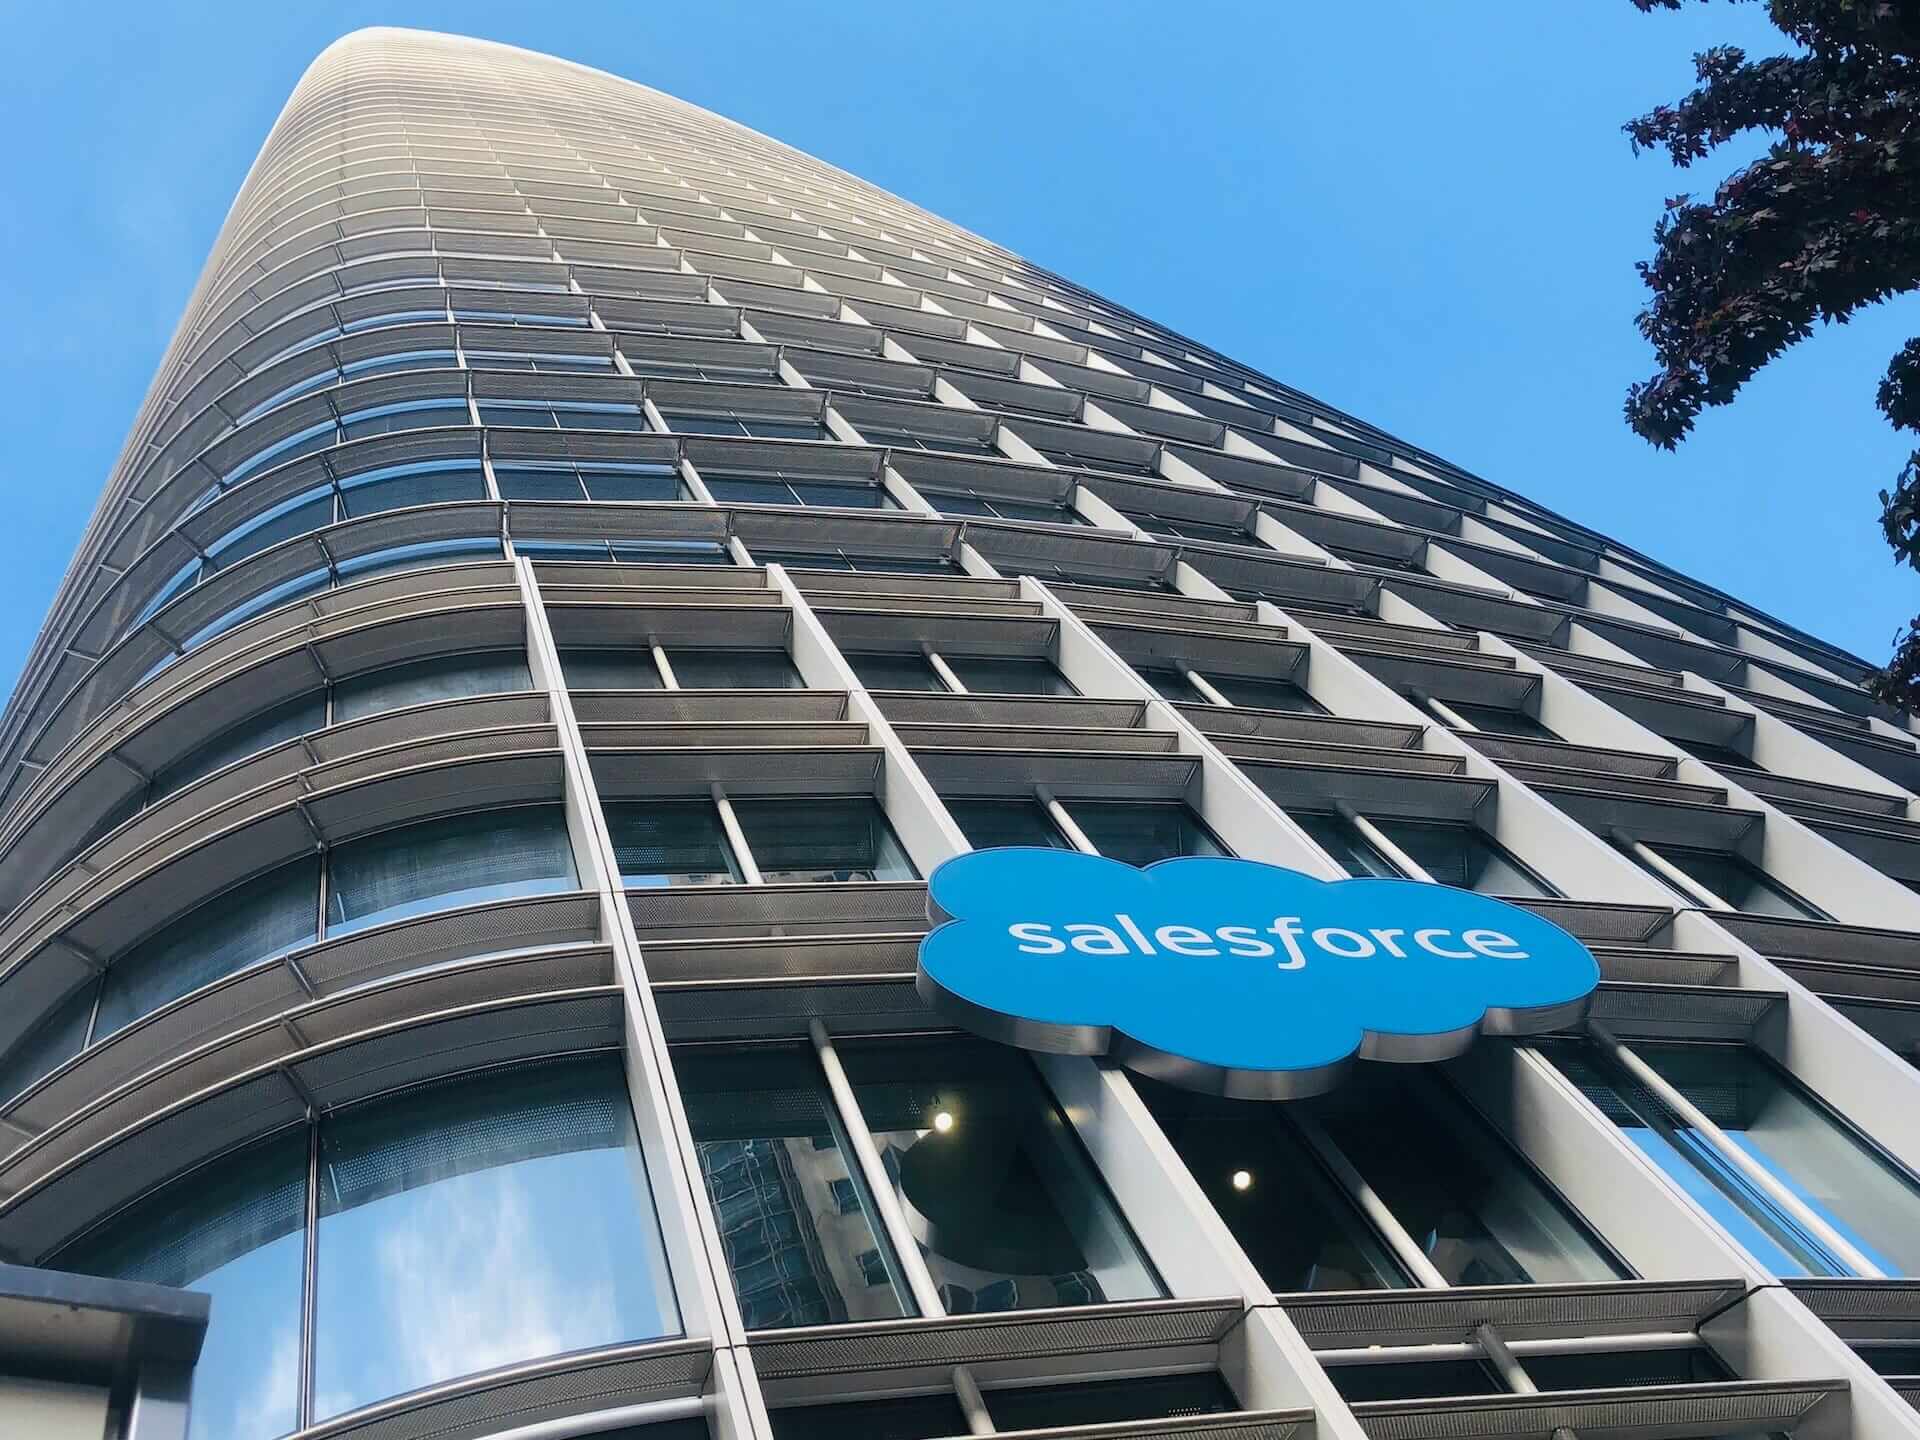 More downtime for Salesforce